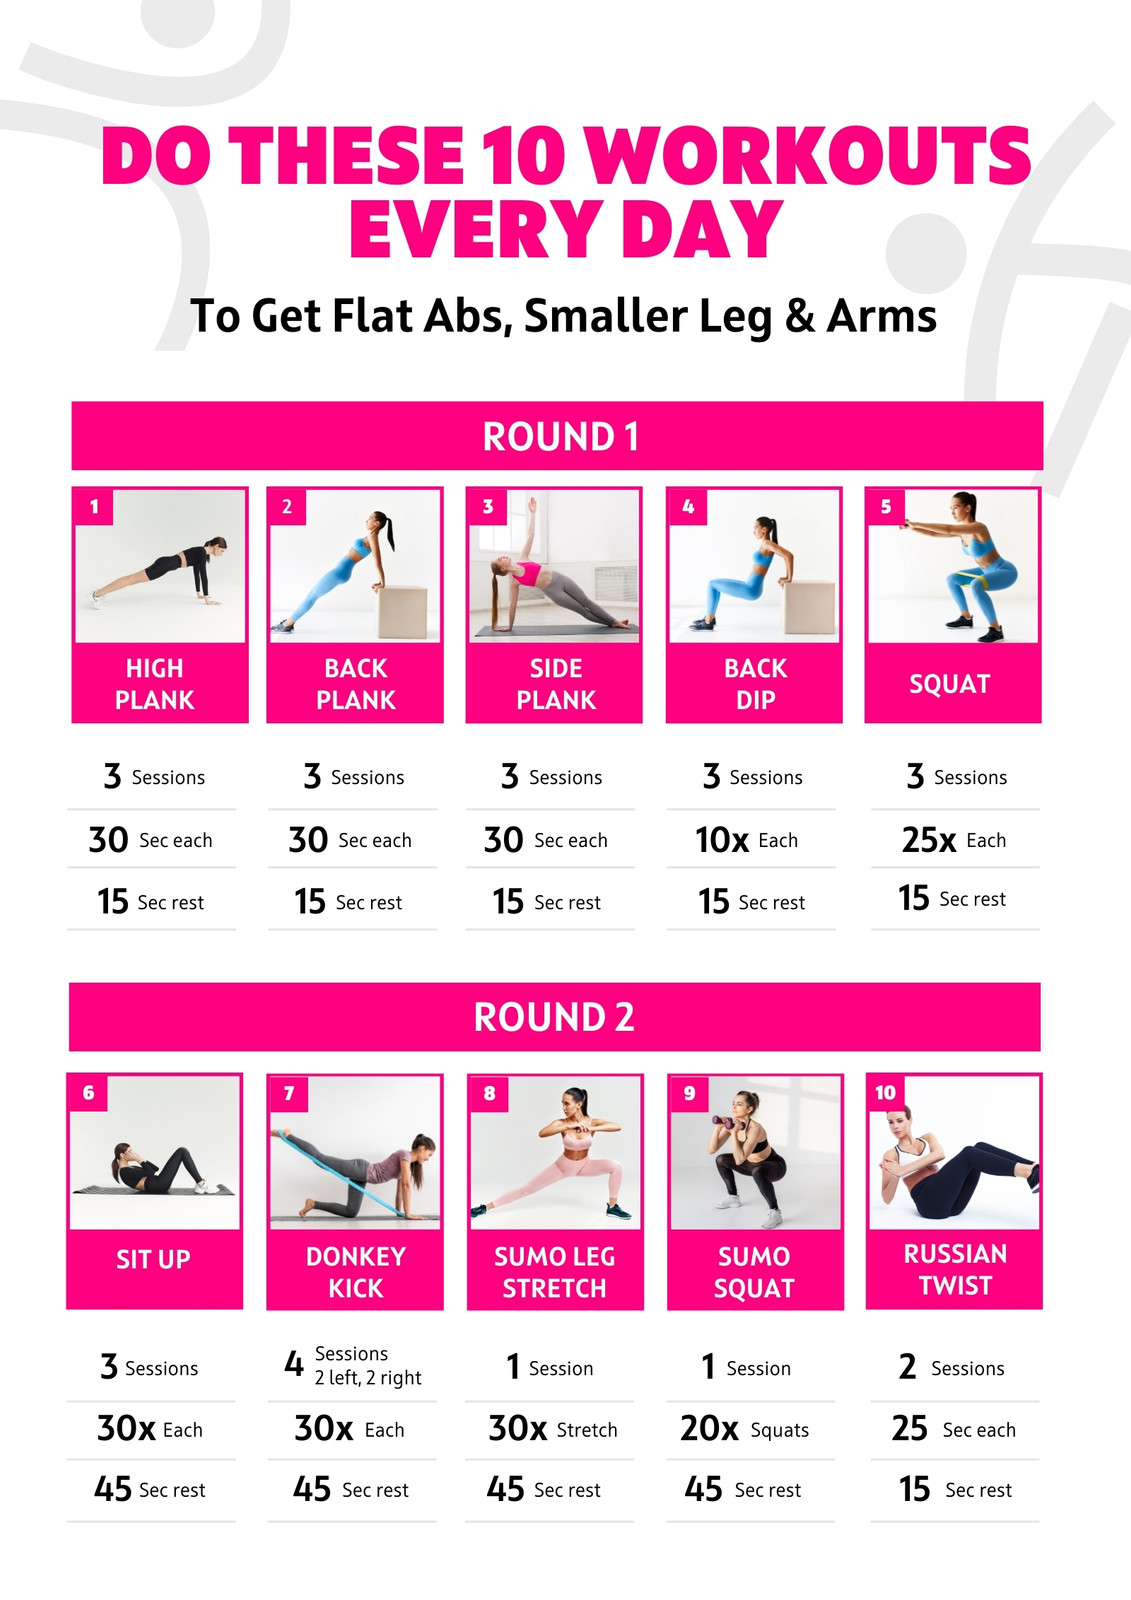 https://marketplace.canva.com/EAFHx1G7vQk/1/0/1131w/canva-white-pink-home-fitness-workout-exercise-guide-infographic-poster-tI1XGsfVdks.jpg